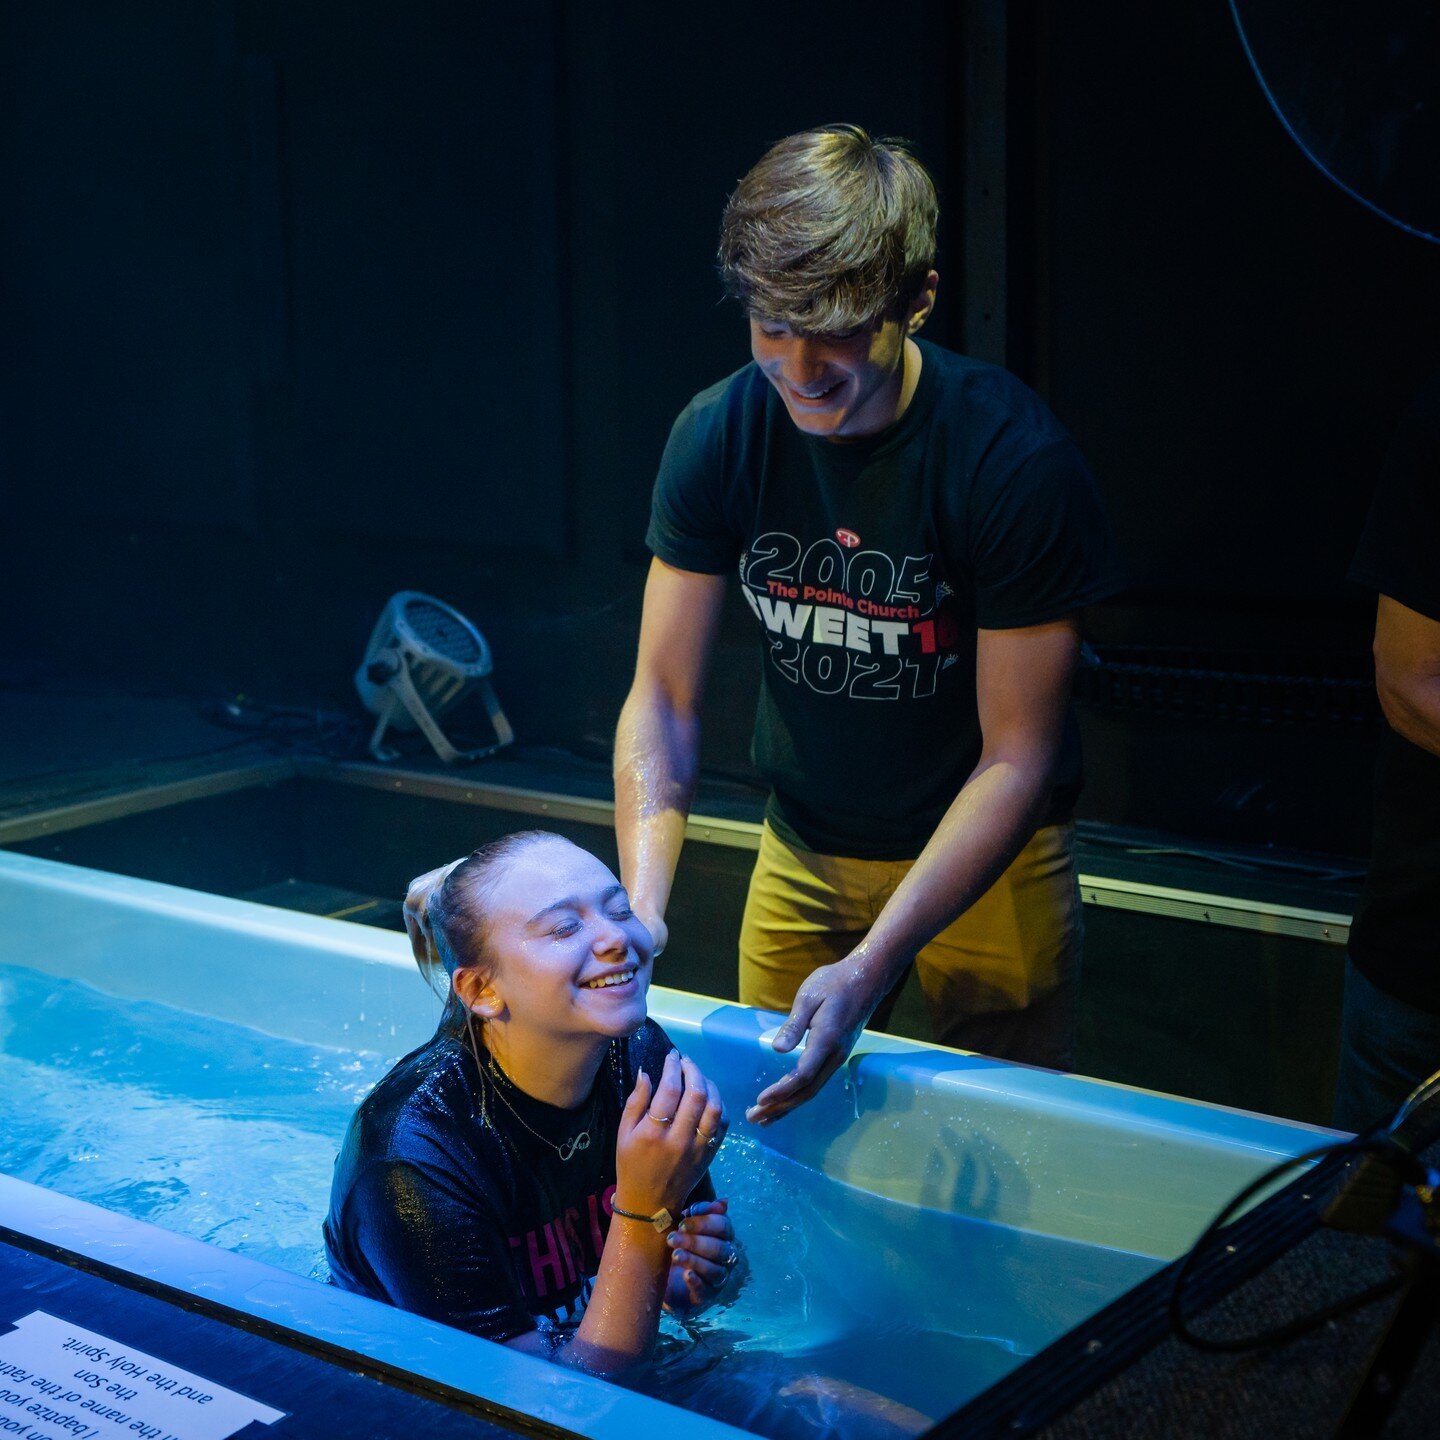 This Sunday is going to be one to remember! Join us for an amazing celebration of over 50 baptisms over all 3 services. 🌊 You don't want to miss this! PS... don't forget to change your clocks for spring forward this Sunday 🕐 You may lose an hour of